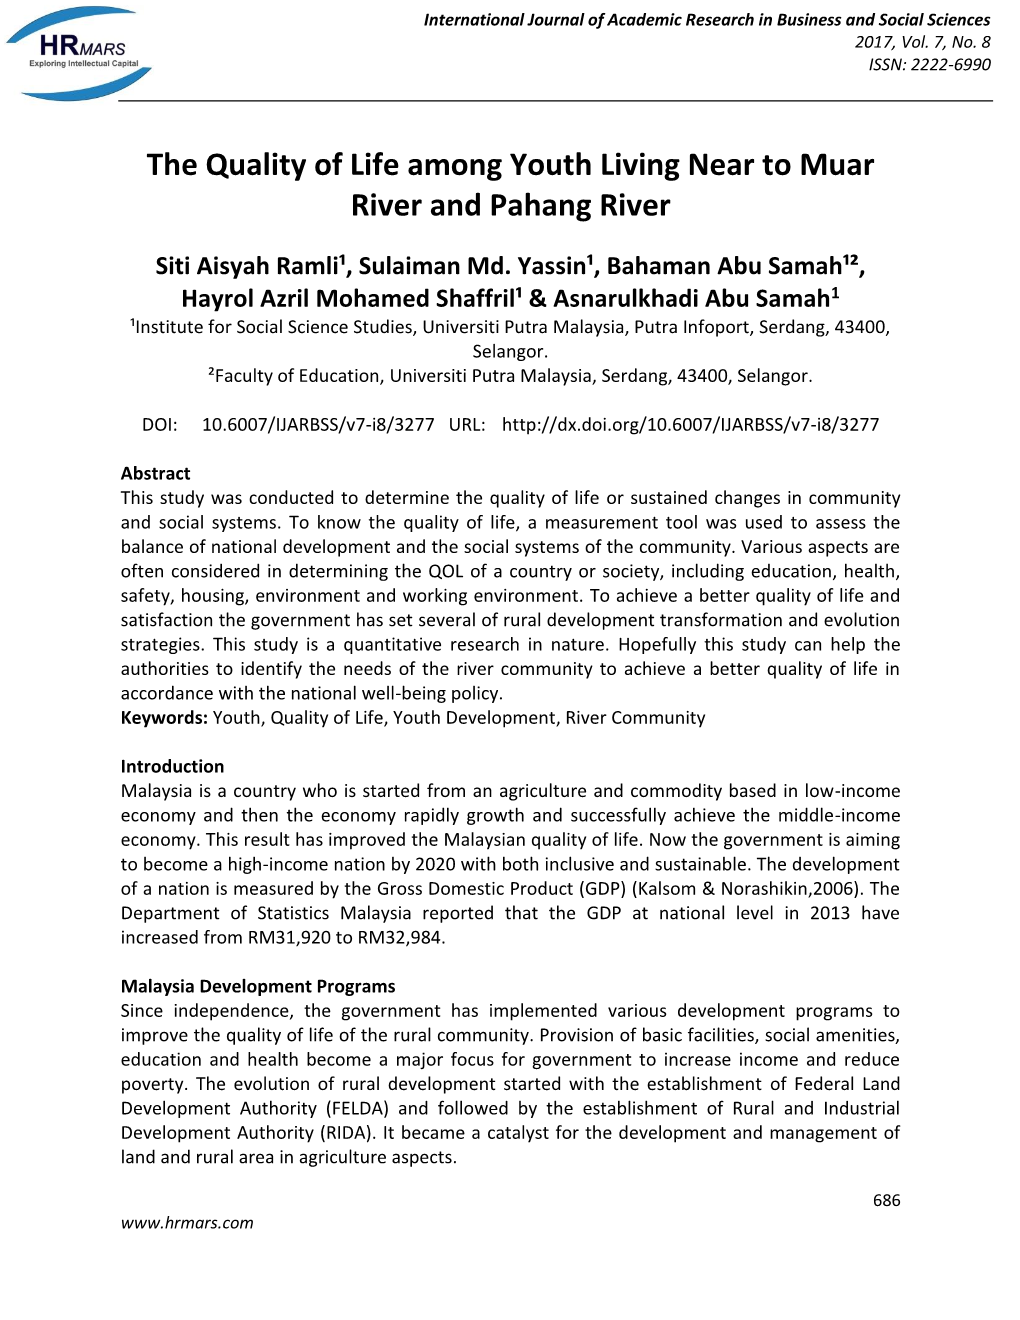 The Quality of Life Among Youth Living Near to Muar River and Pahang River